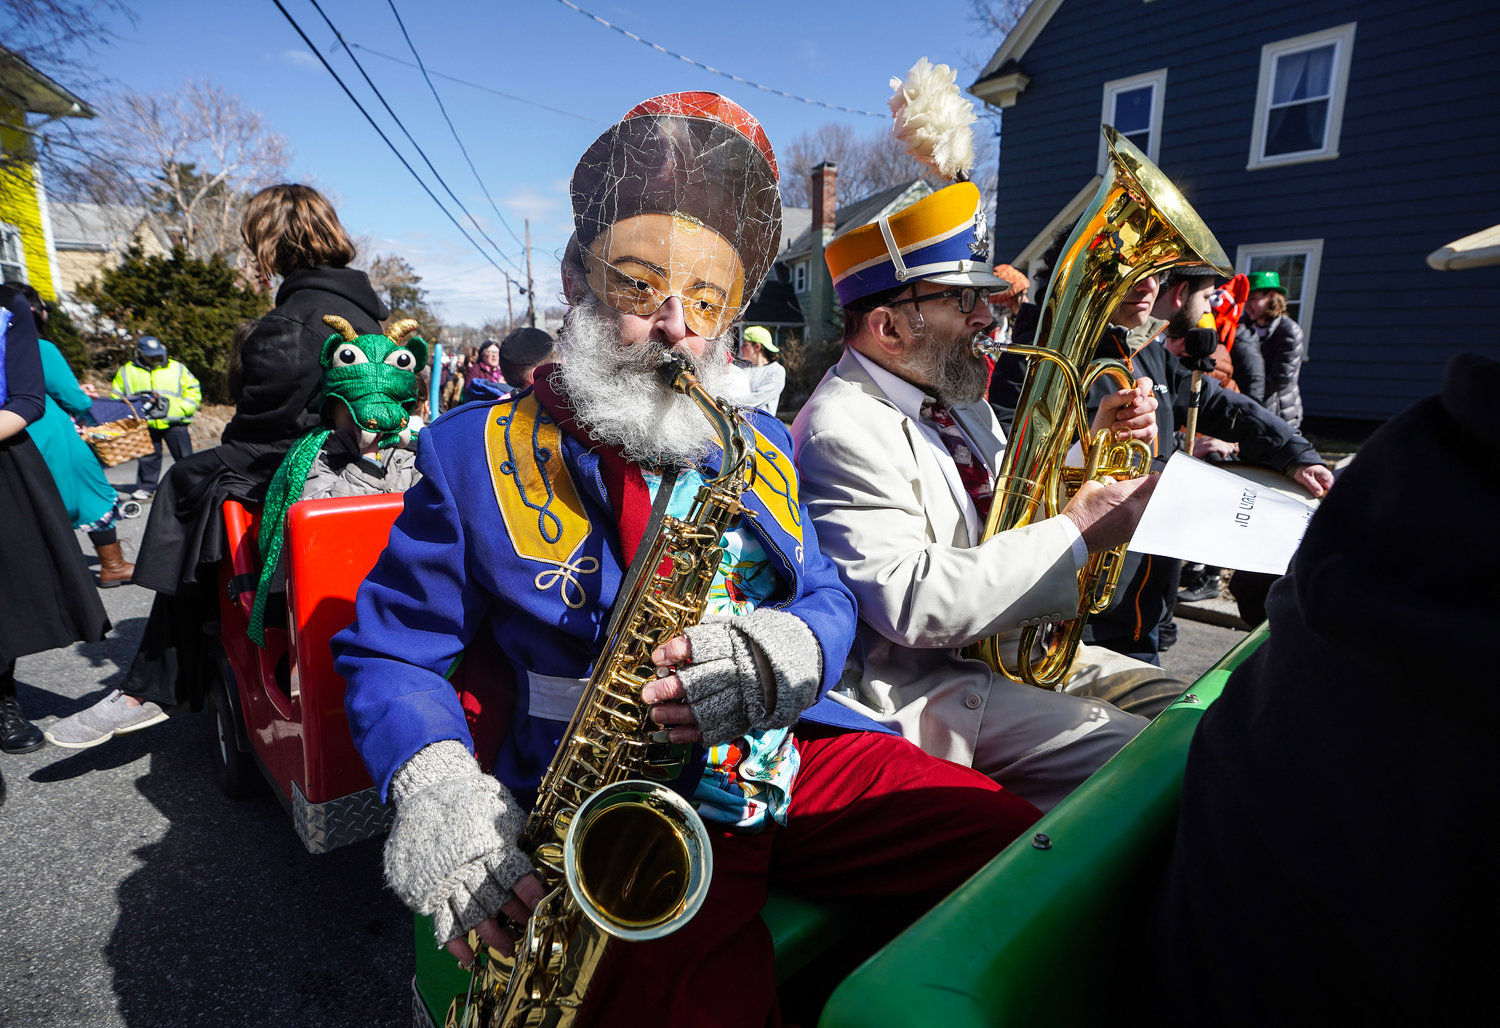 Fishel Bresler, of Pawtucket, plays the saxophone as the parade turns onto Morris Avenue.